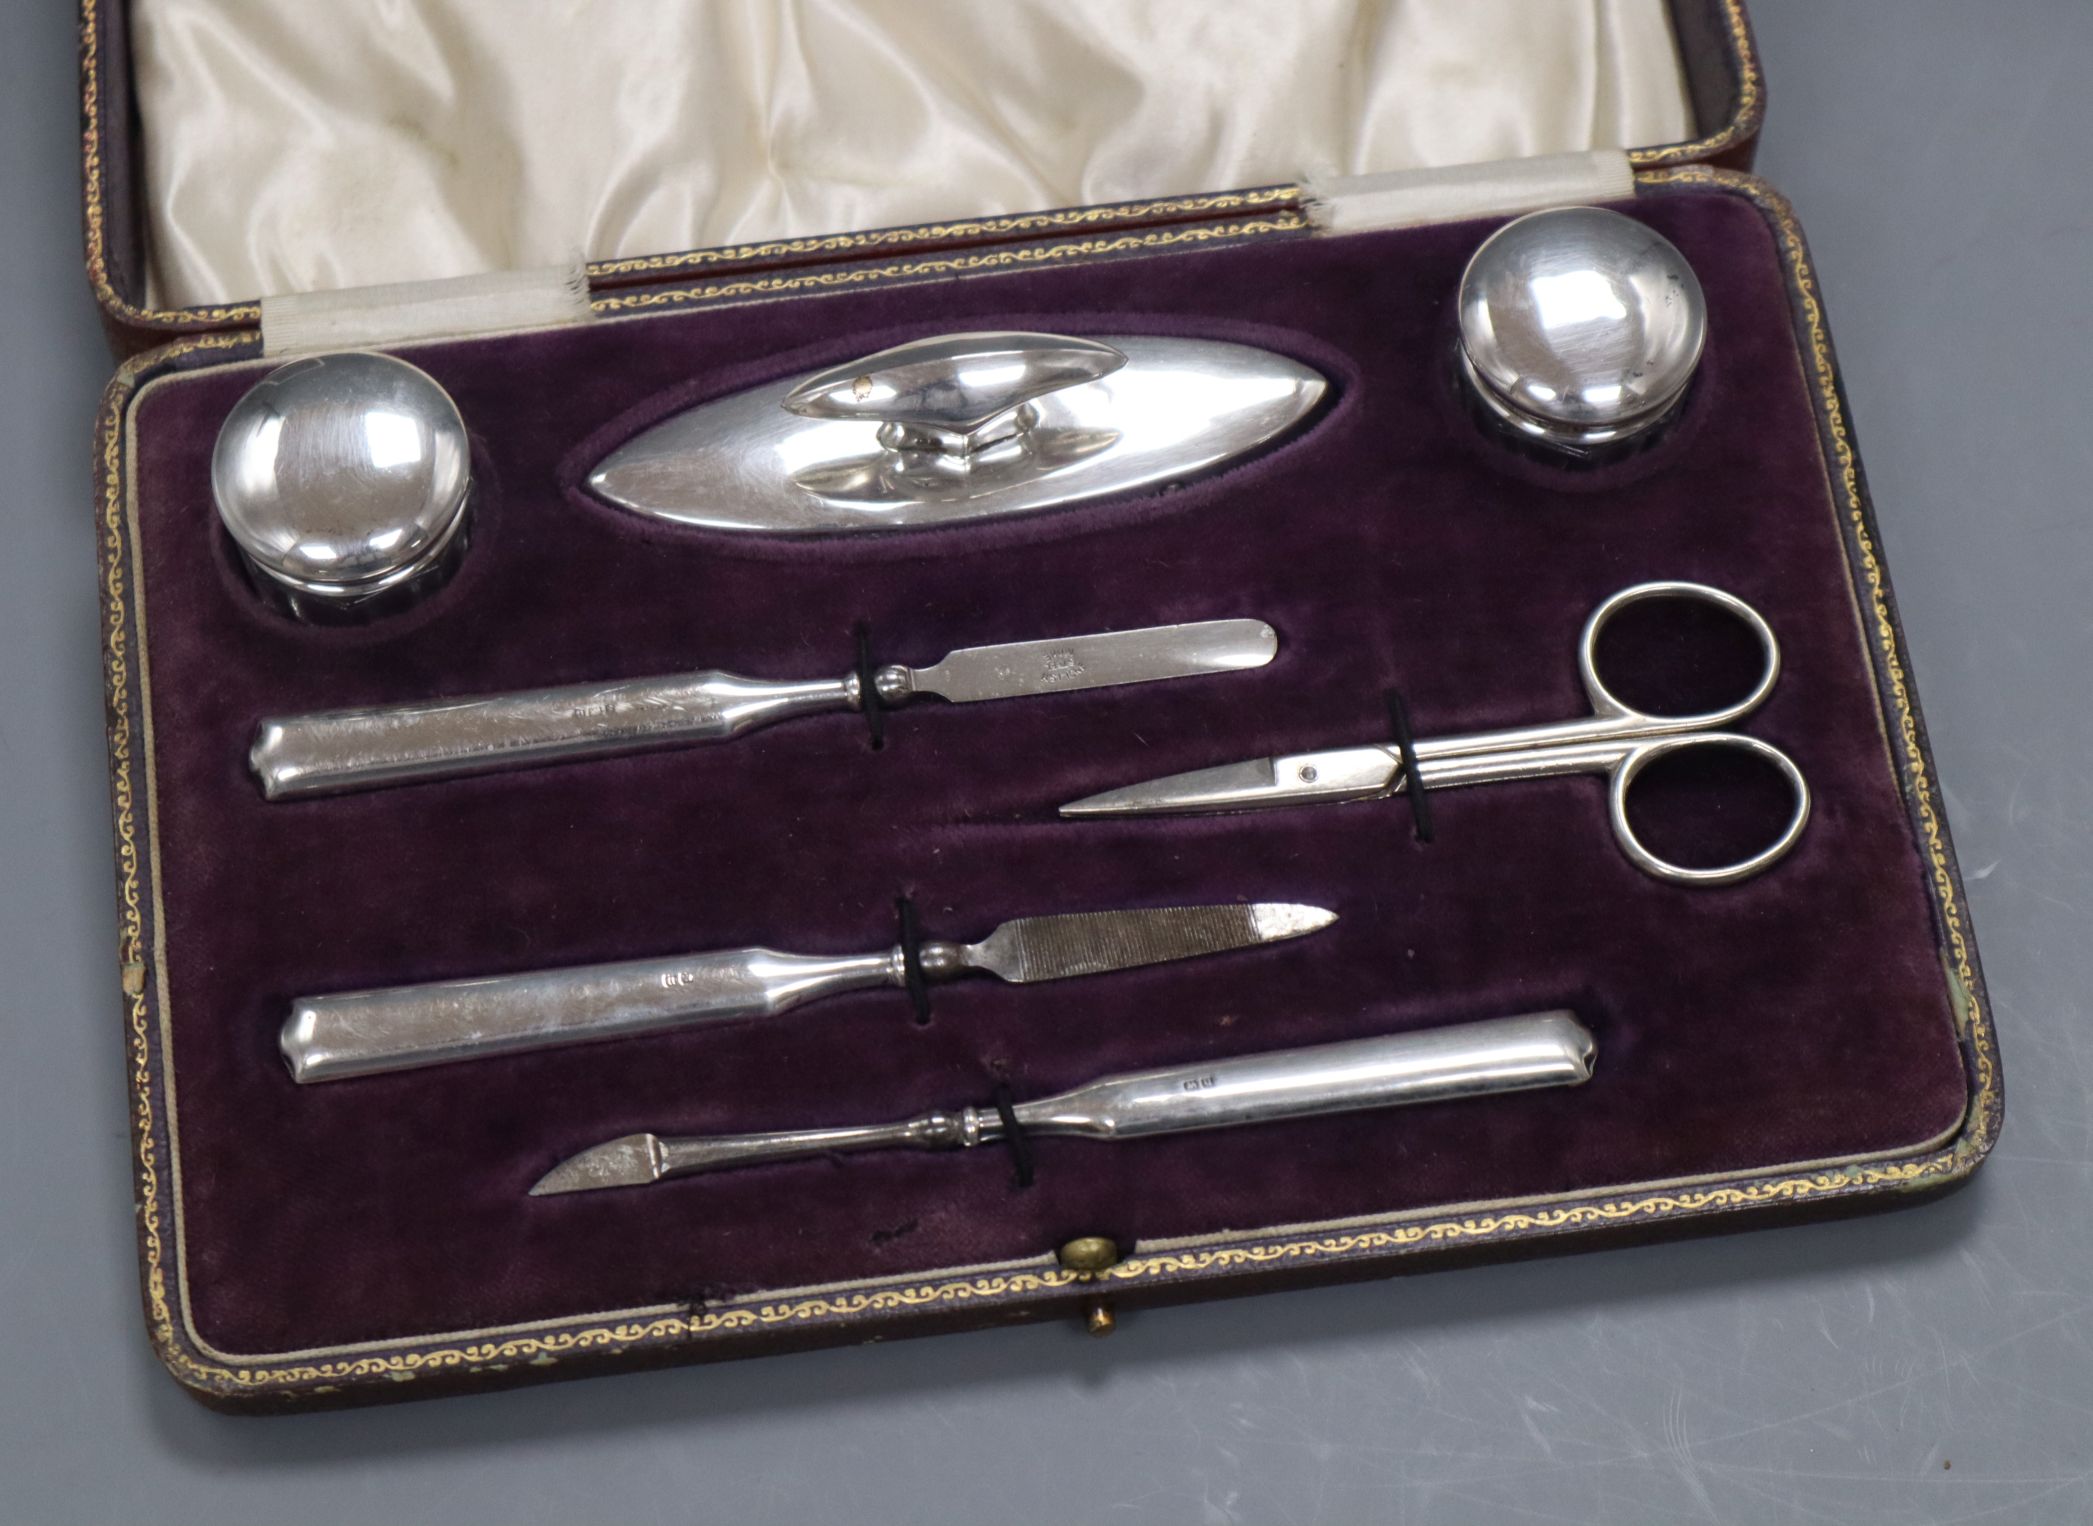 A cased George V silver mounted six piece manicure set with steel scissors.